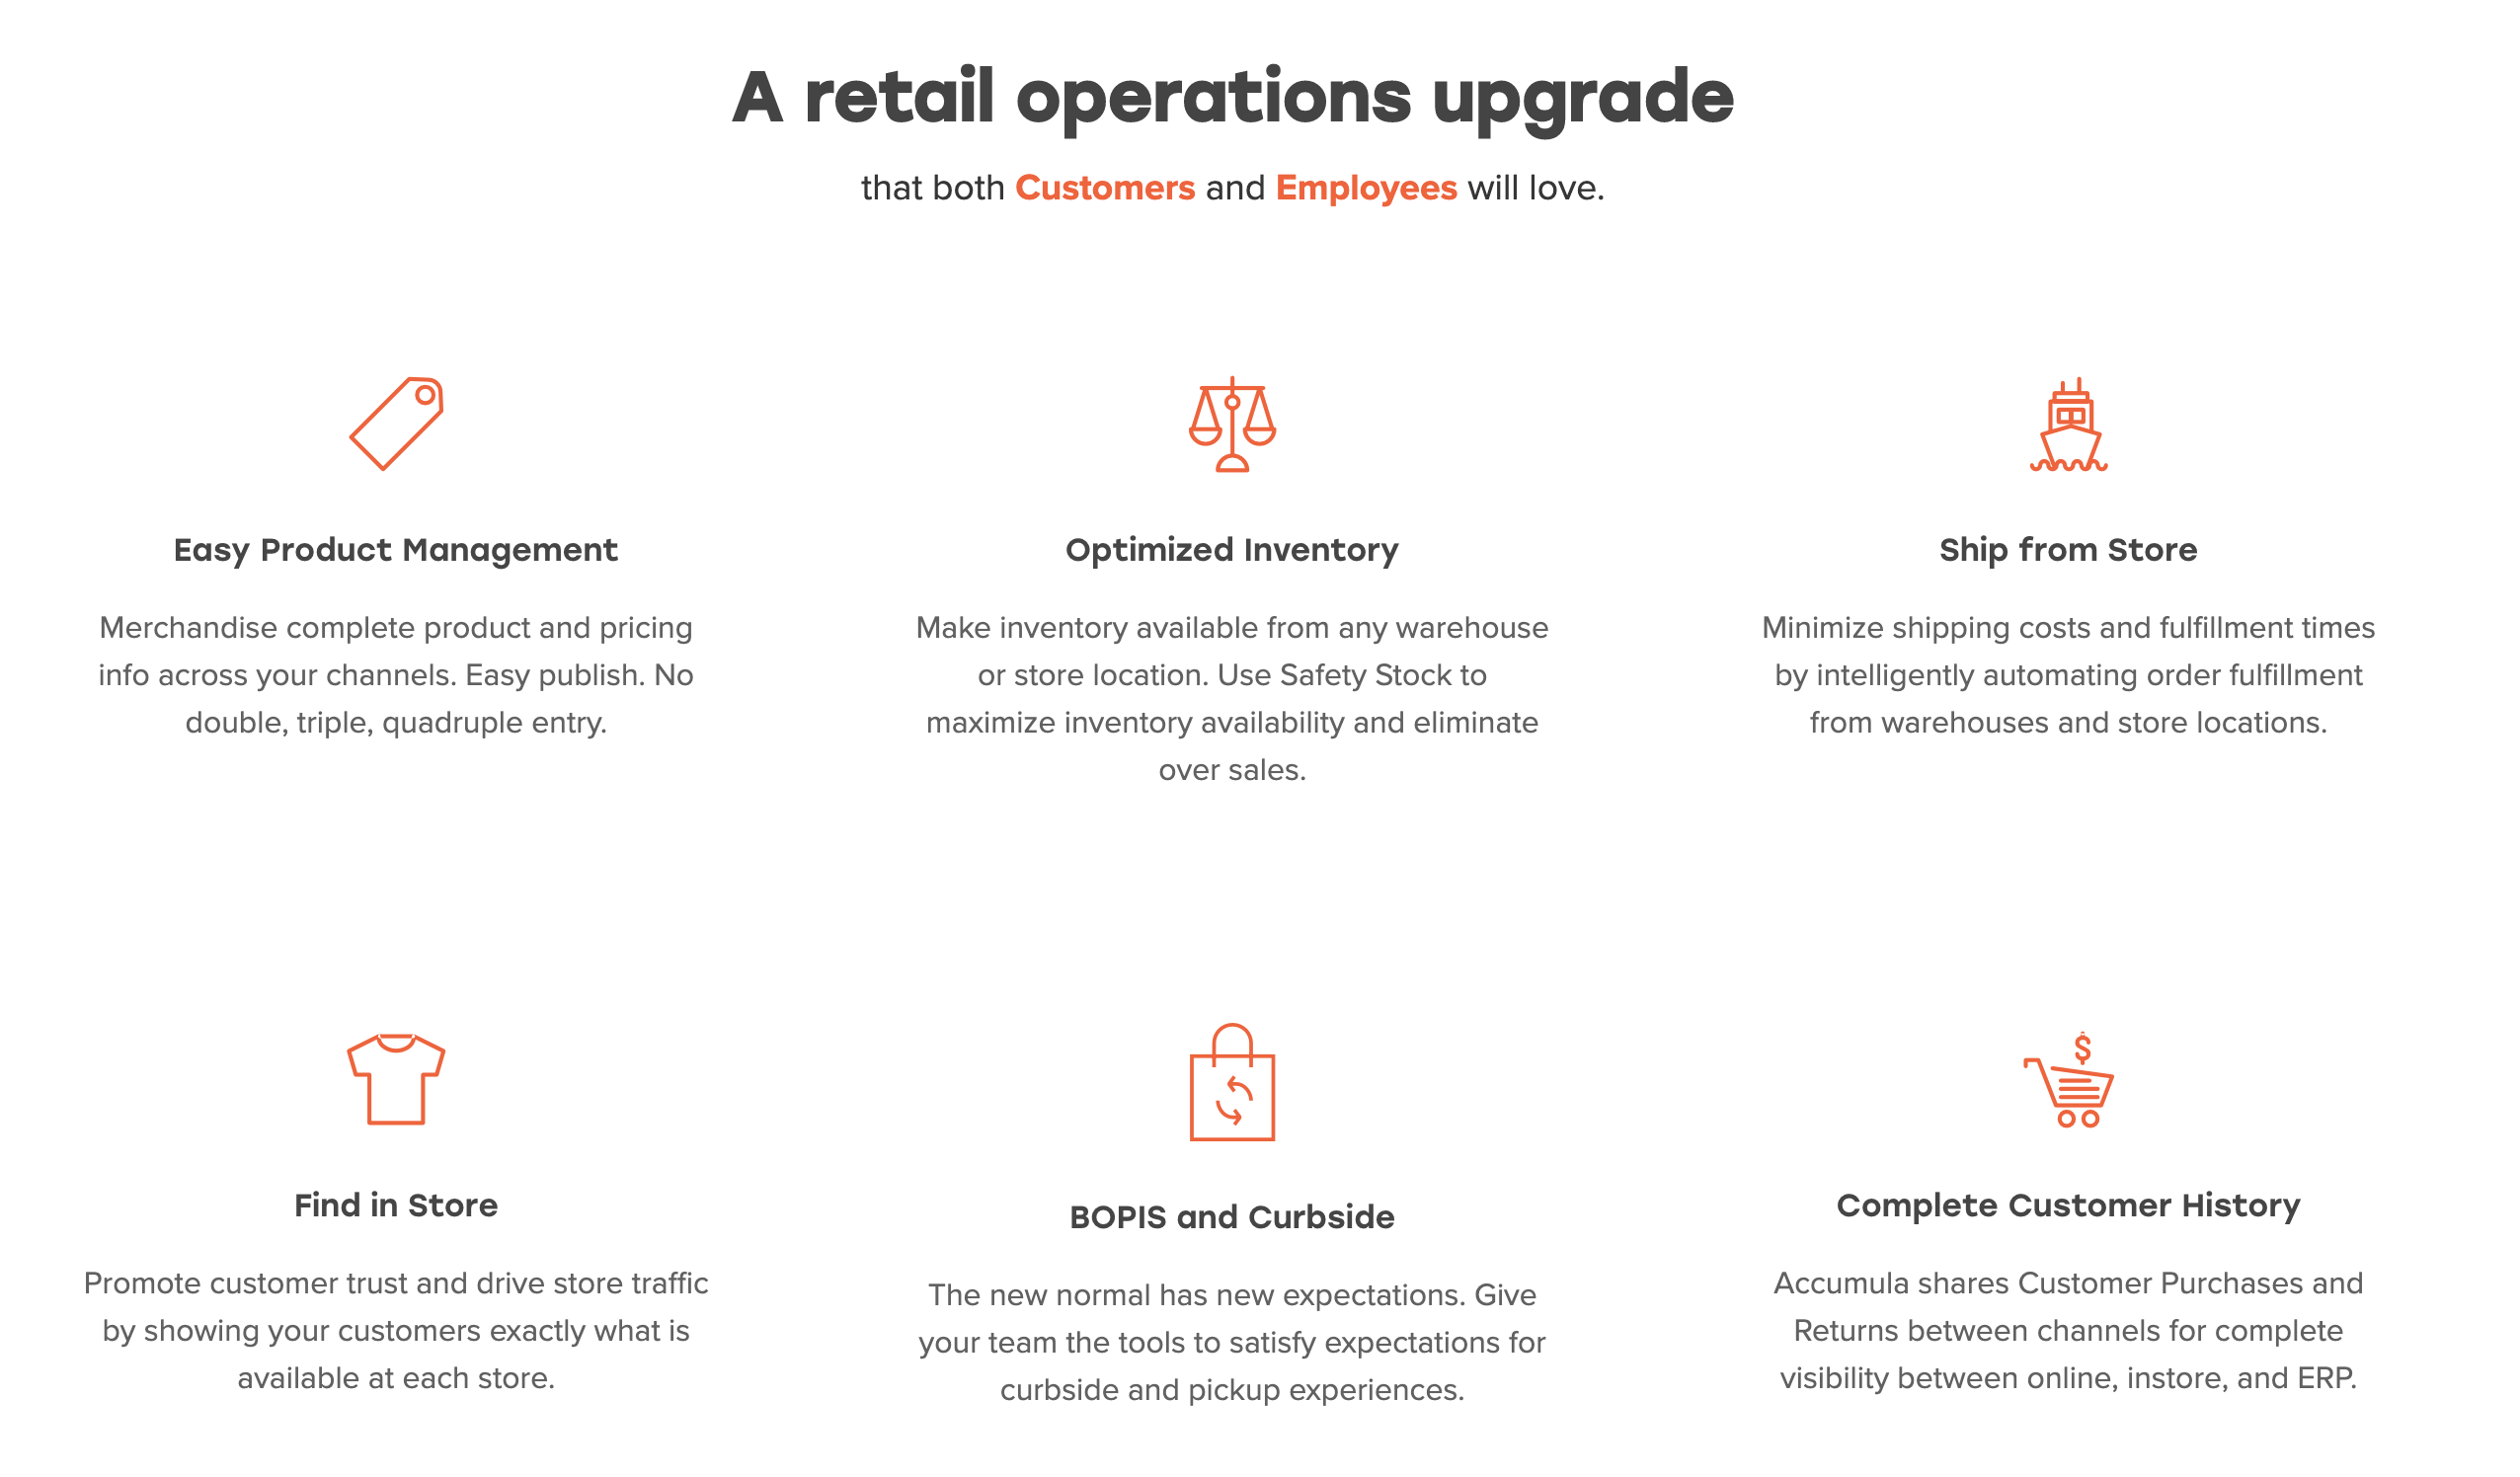 Accumula's Value Props: Easy Product Management, Optimized Inventory, Ship from Store, Find in Store, BOPIS and Curbside,  Complete Customer History.